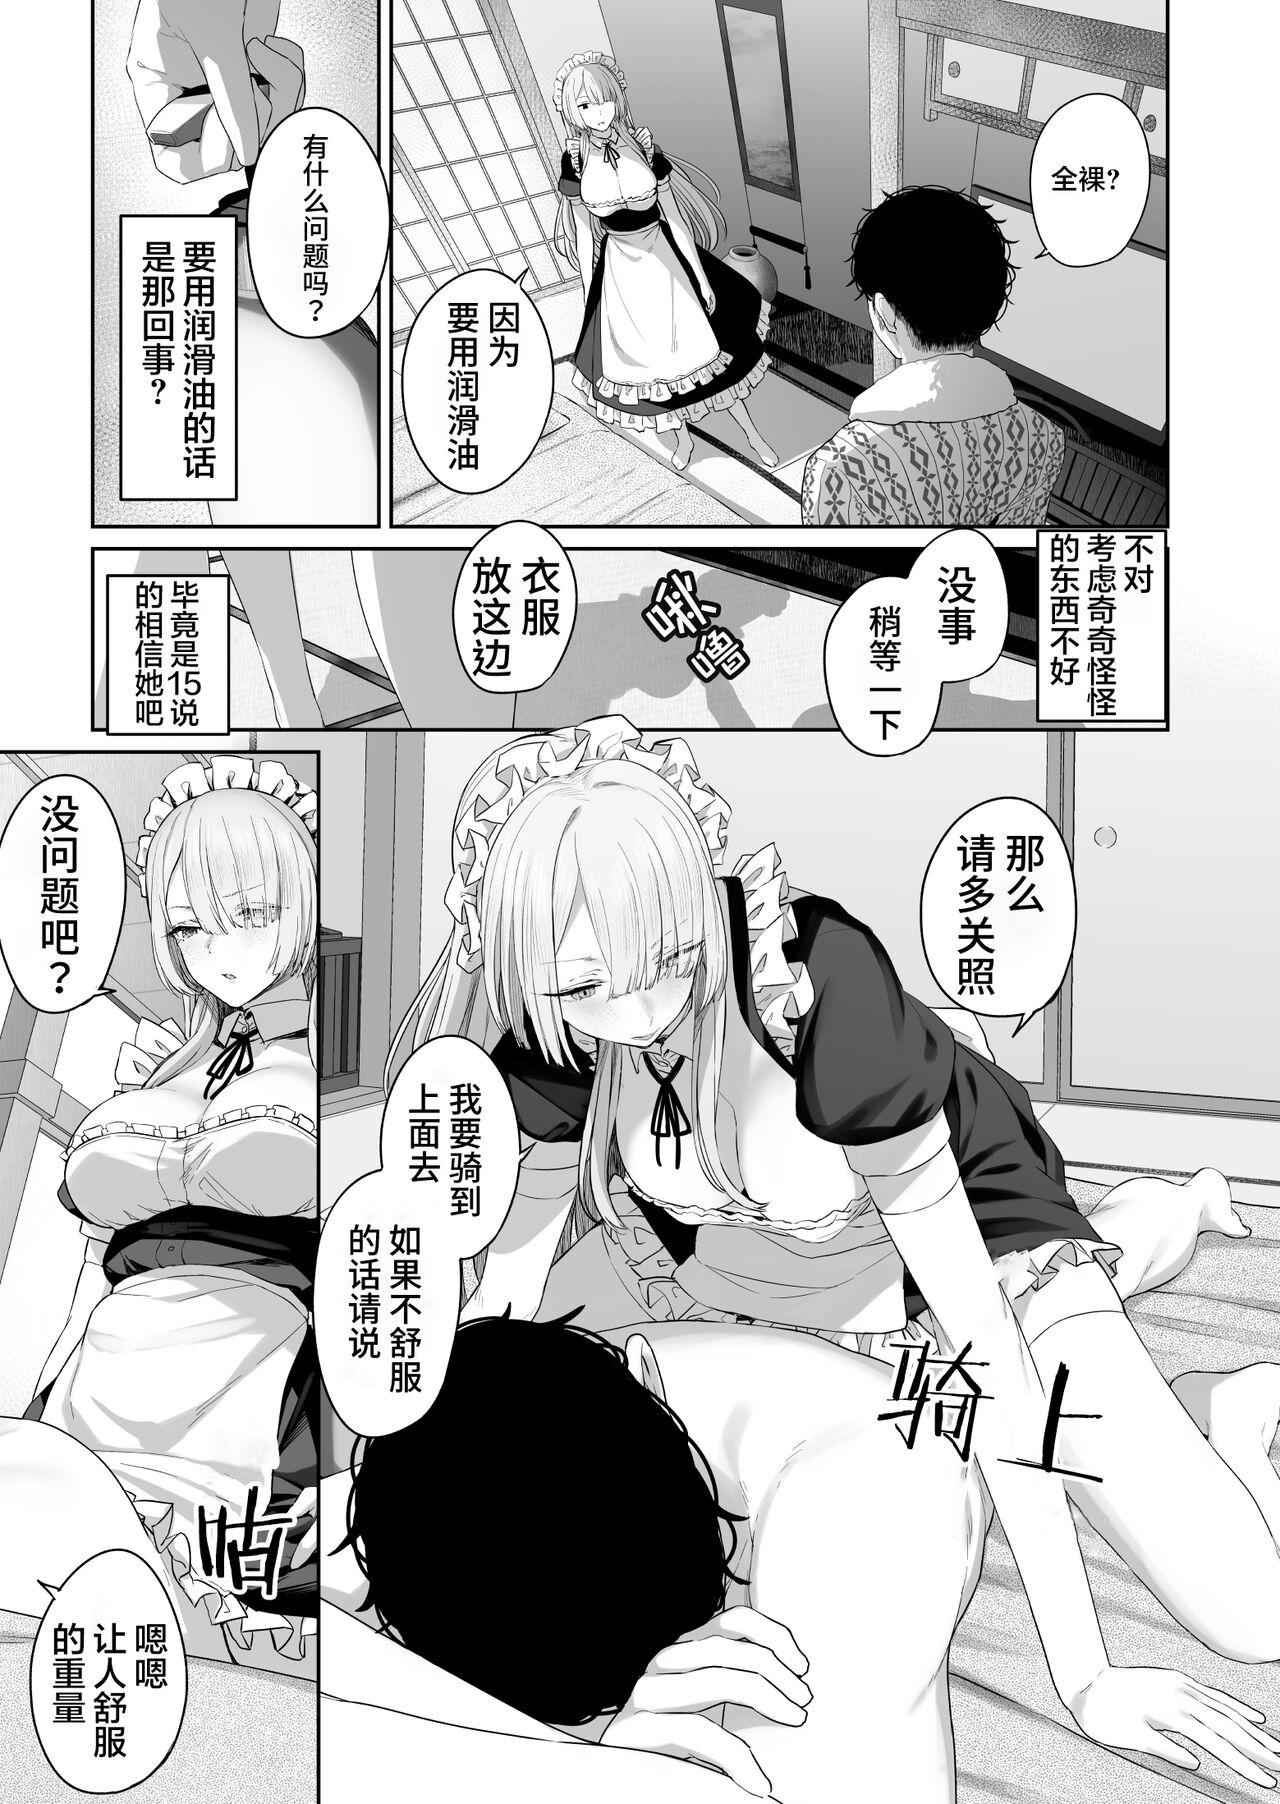 Pussylick AK15の進捗1 - Girls frontline Girl - Page 4